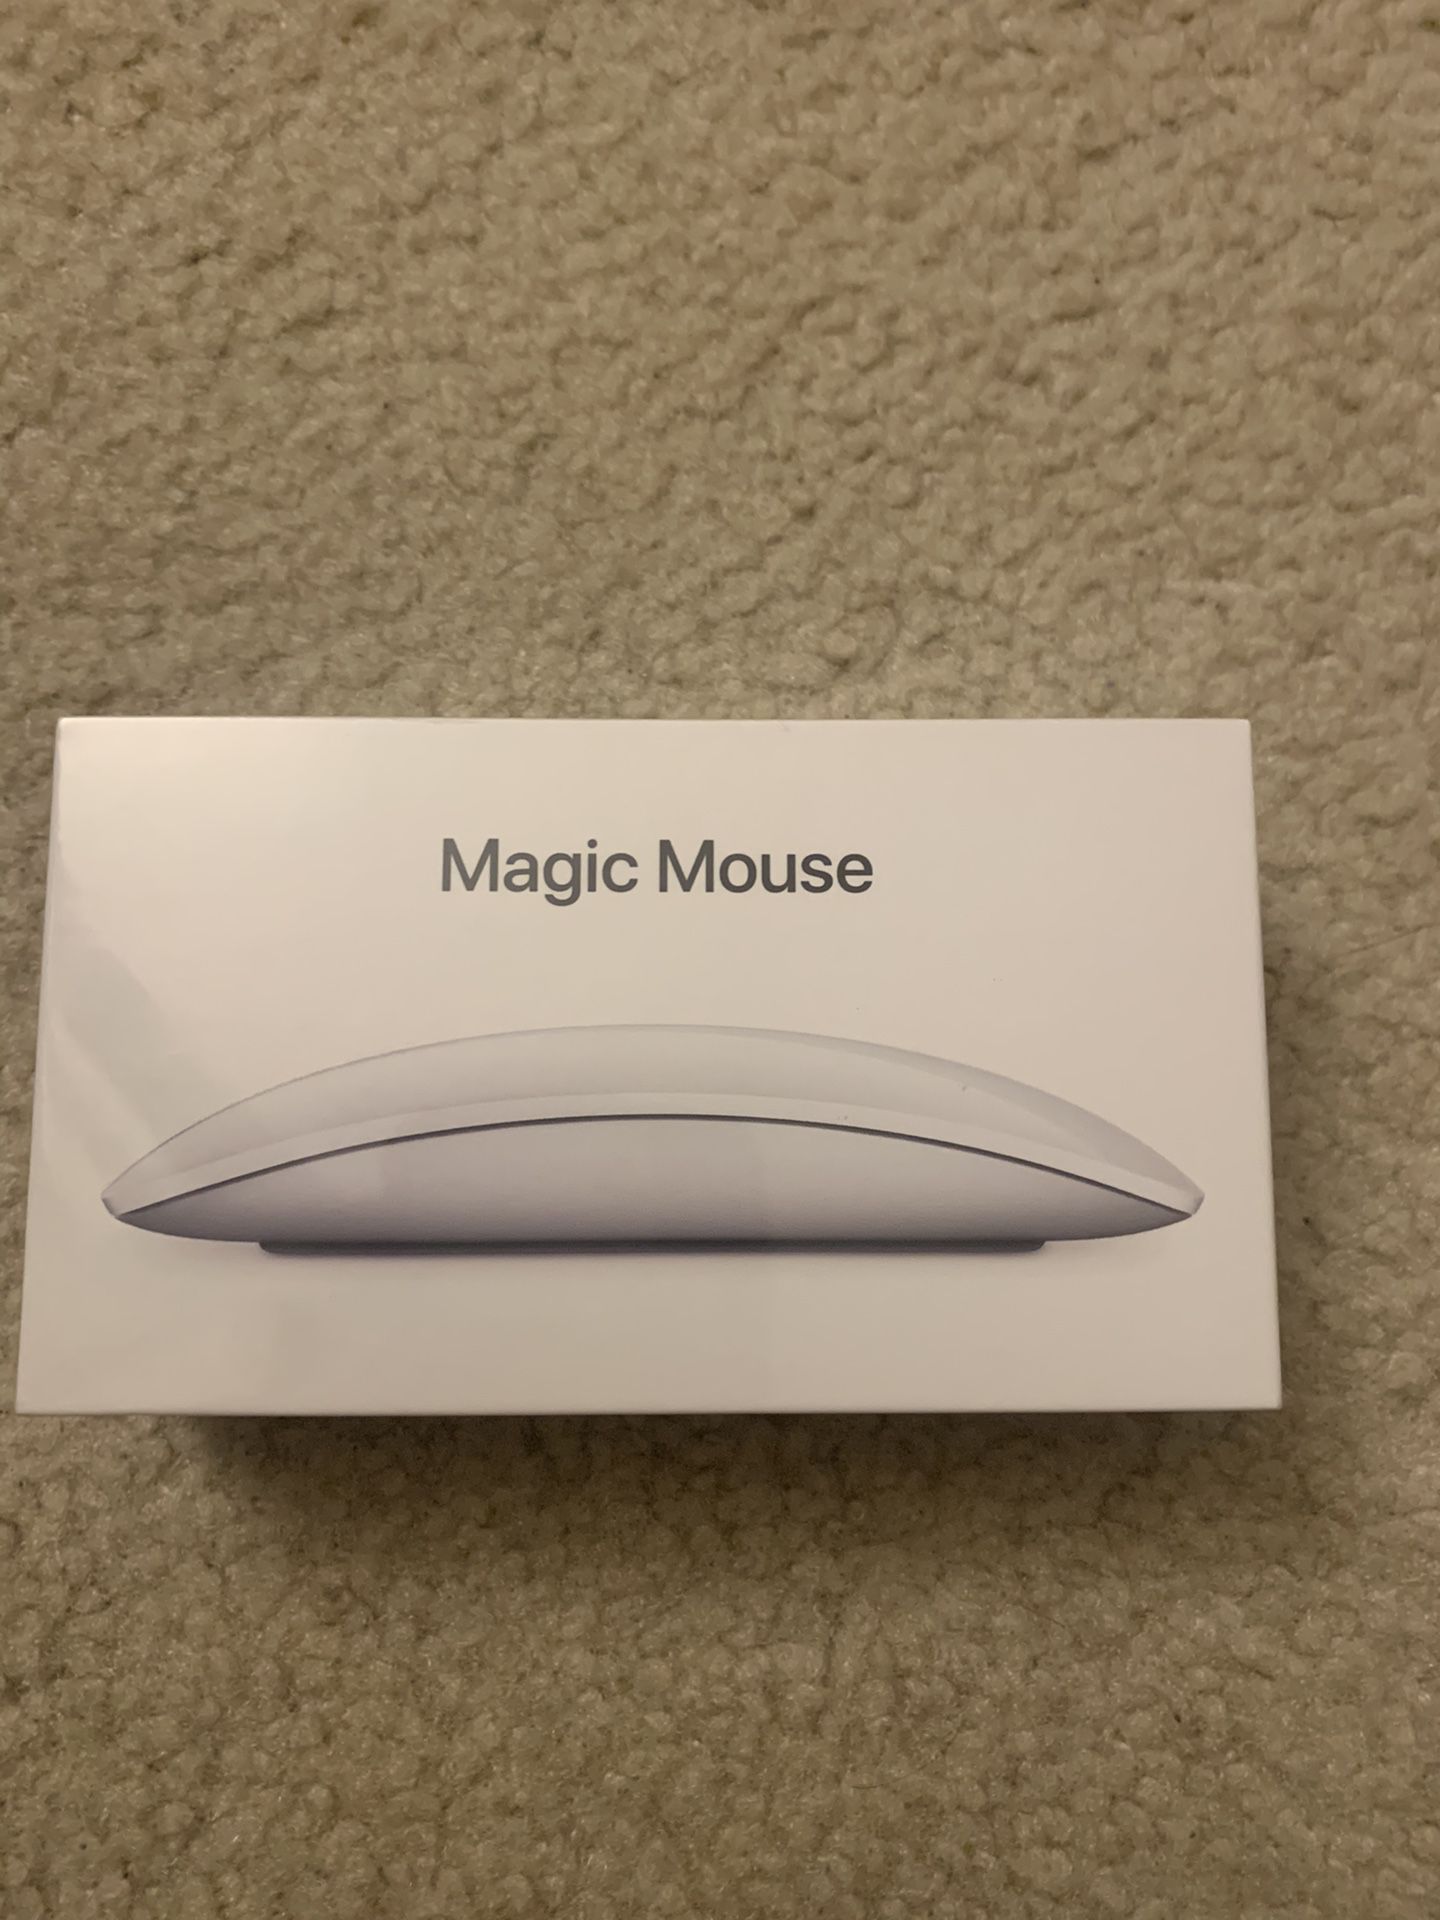 Apple Magic Mouse 2 (MLA02LL/A) Wireless Mouse - Silver